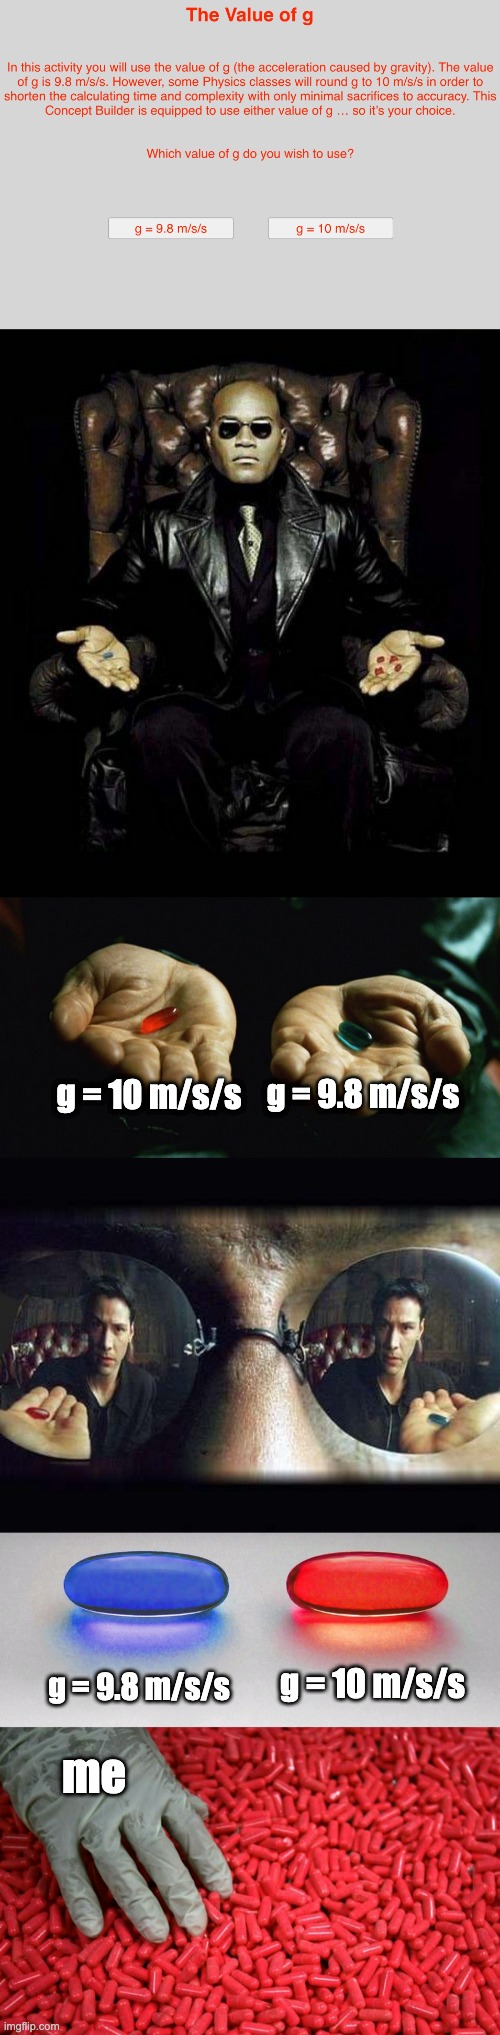 g = 10 m/s/s; g = 9.8 m/s/s; g = 10 m/s/s; g = 9.8 m/s/s; me | image tagged in morpheus blue red pill,red pill blue pill,blue or red pill | made w/ Imgflip meme maker